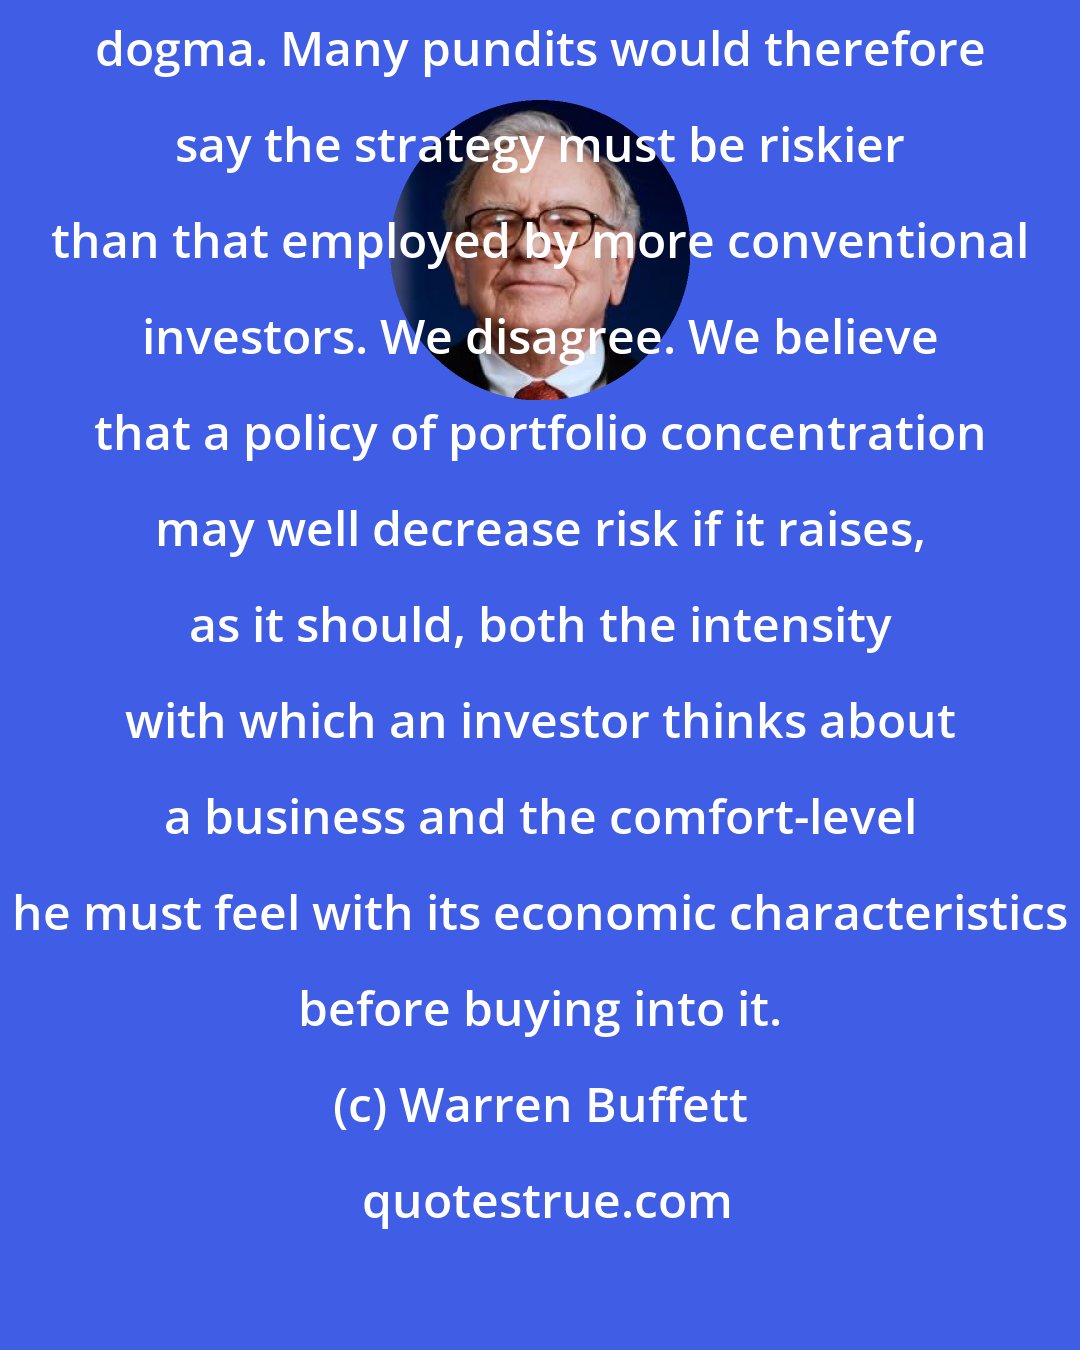 Warren Buffett: The strategy we've adopted precludes our following standard diversification dogma. Many pundits would therefore say the strategy must be riskier than that employed by more conventional investors. We disagree. We believe that a policy of portfolio concentration may well decrease risk if it raises, as it should, both the intensity with which an investor thinks about a business and the comfort-level he must feel with its economic characteristics before buying into it.